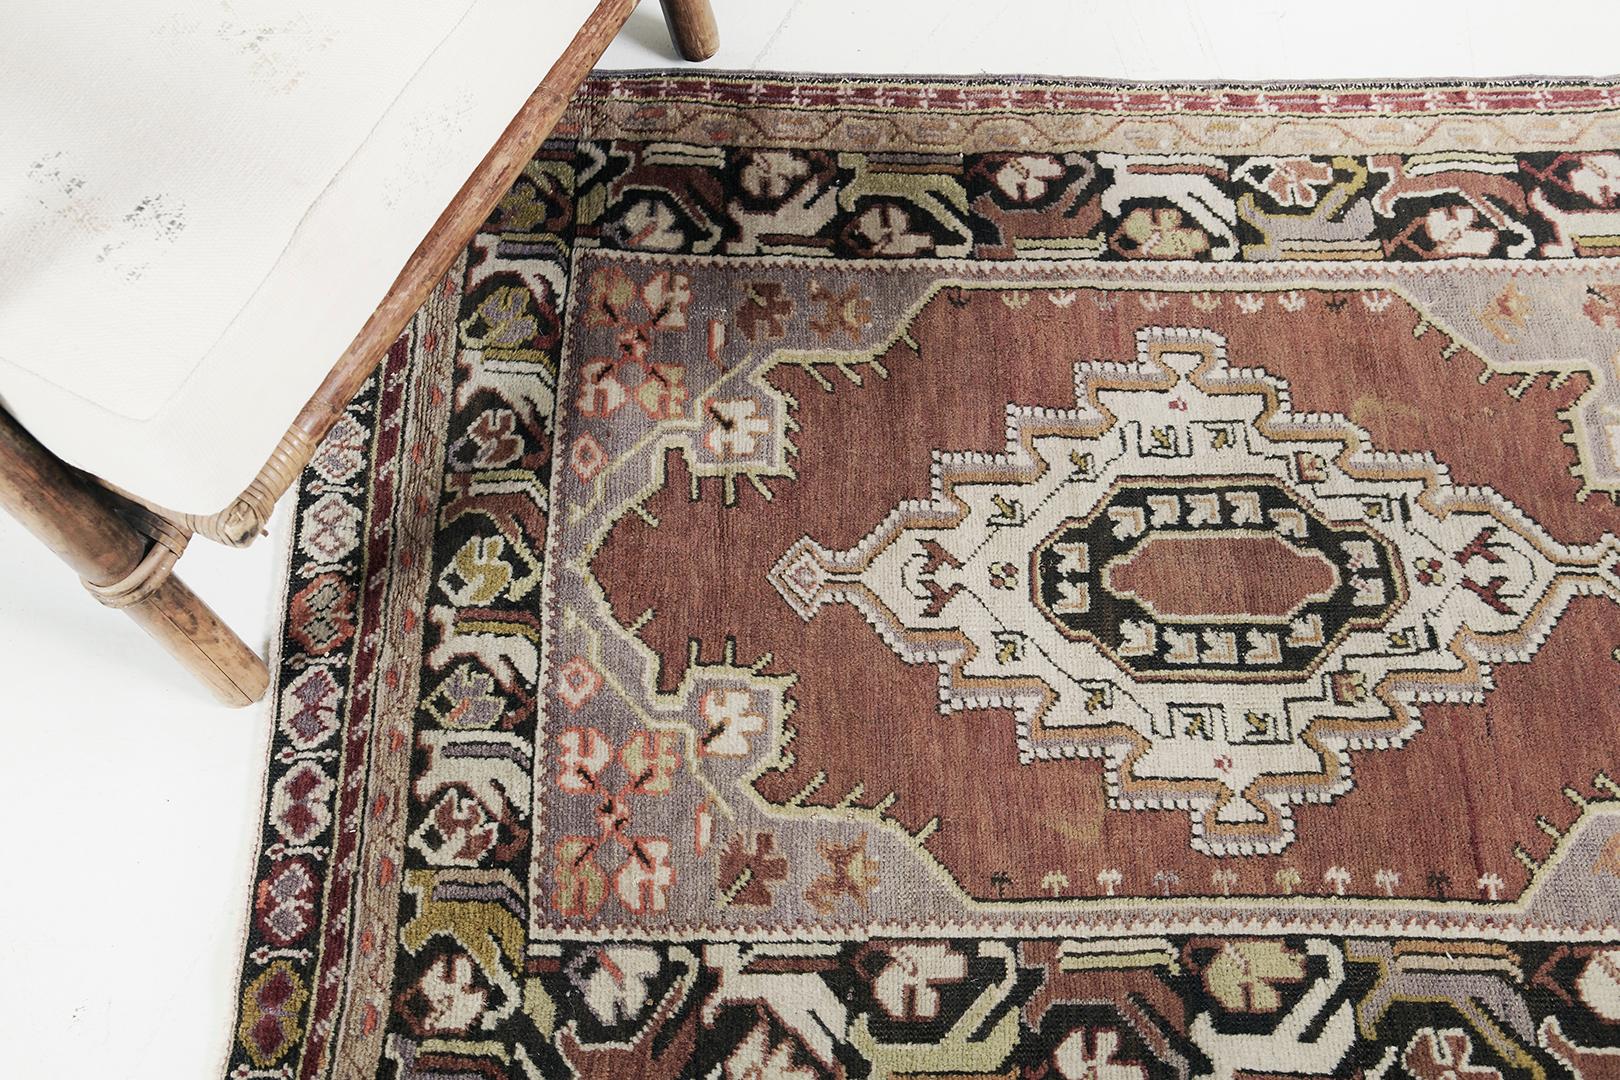 Majestic elegance and vivid colors bring alluring appeal to this Vintage Turkish Anatolian rug. It embodies the captivating Anatolian style with an all-over ornate pattern composed of palmettes and stylized florals dancing along the graceful motifs